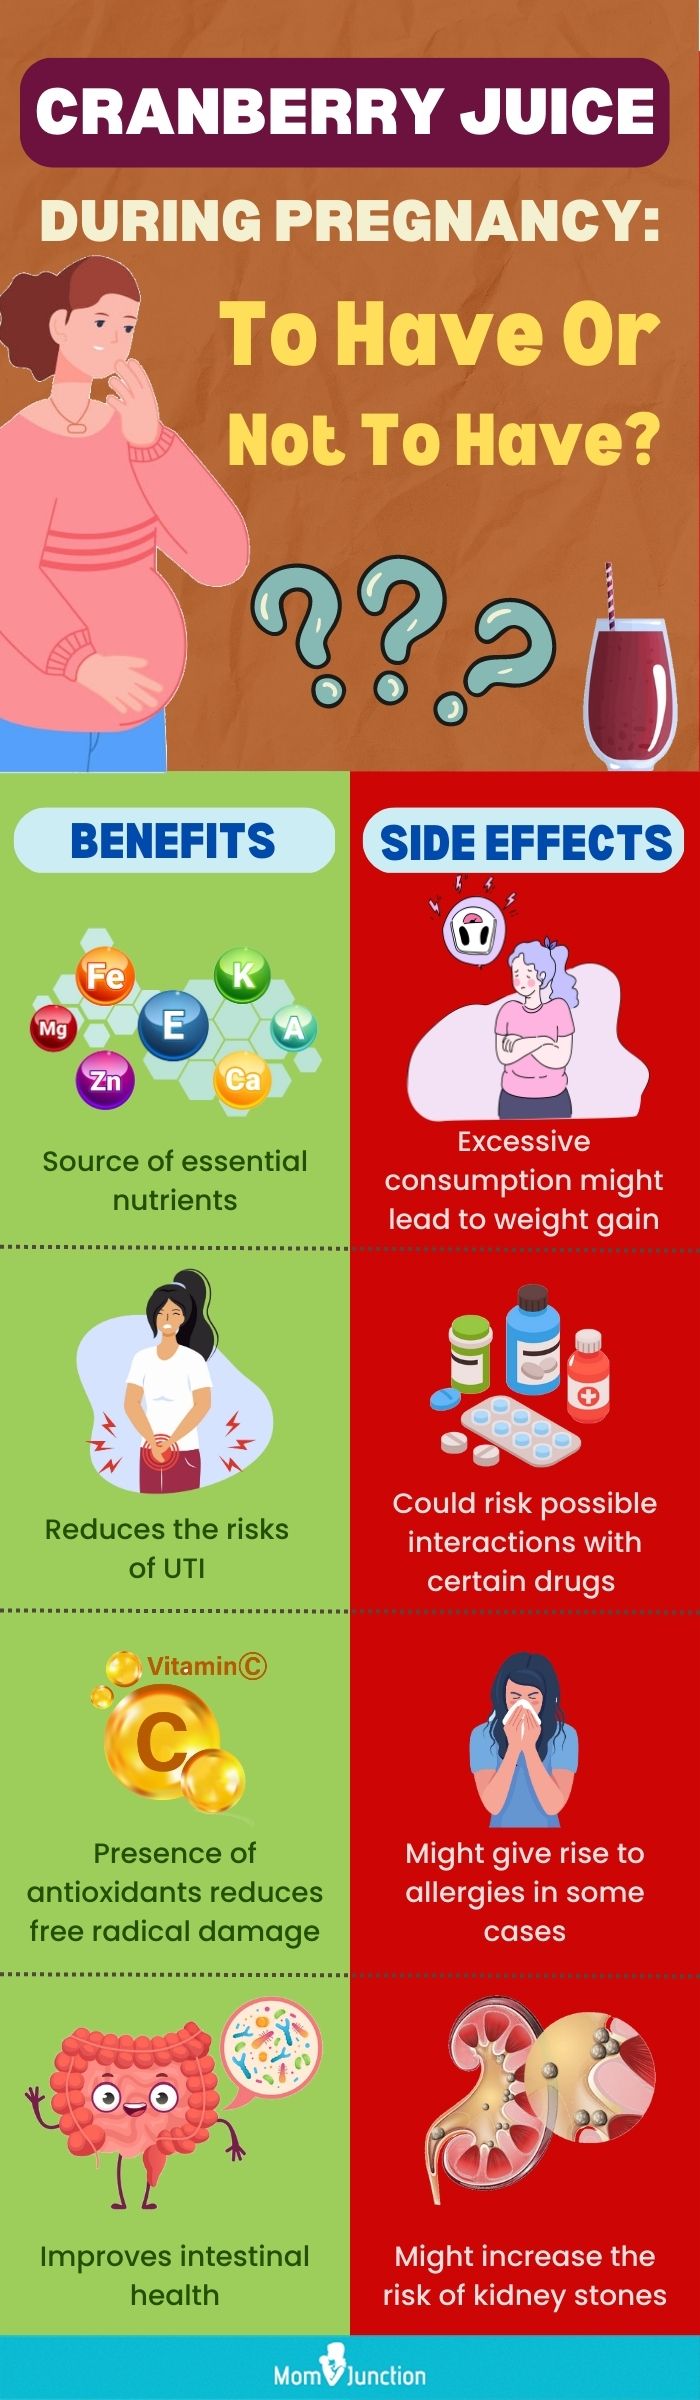 cranberry juice during pregnancy to have or not to have (infographic)